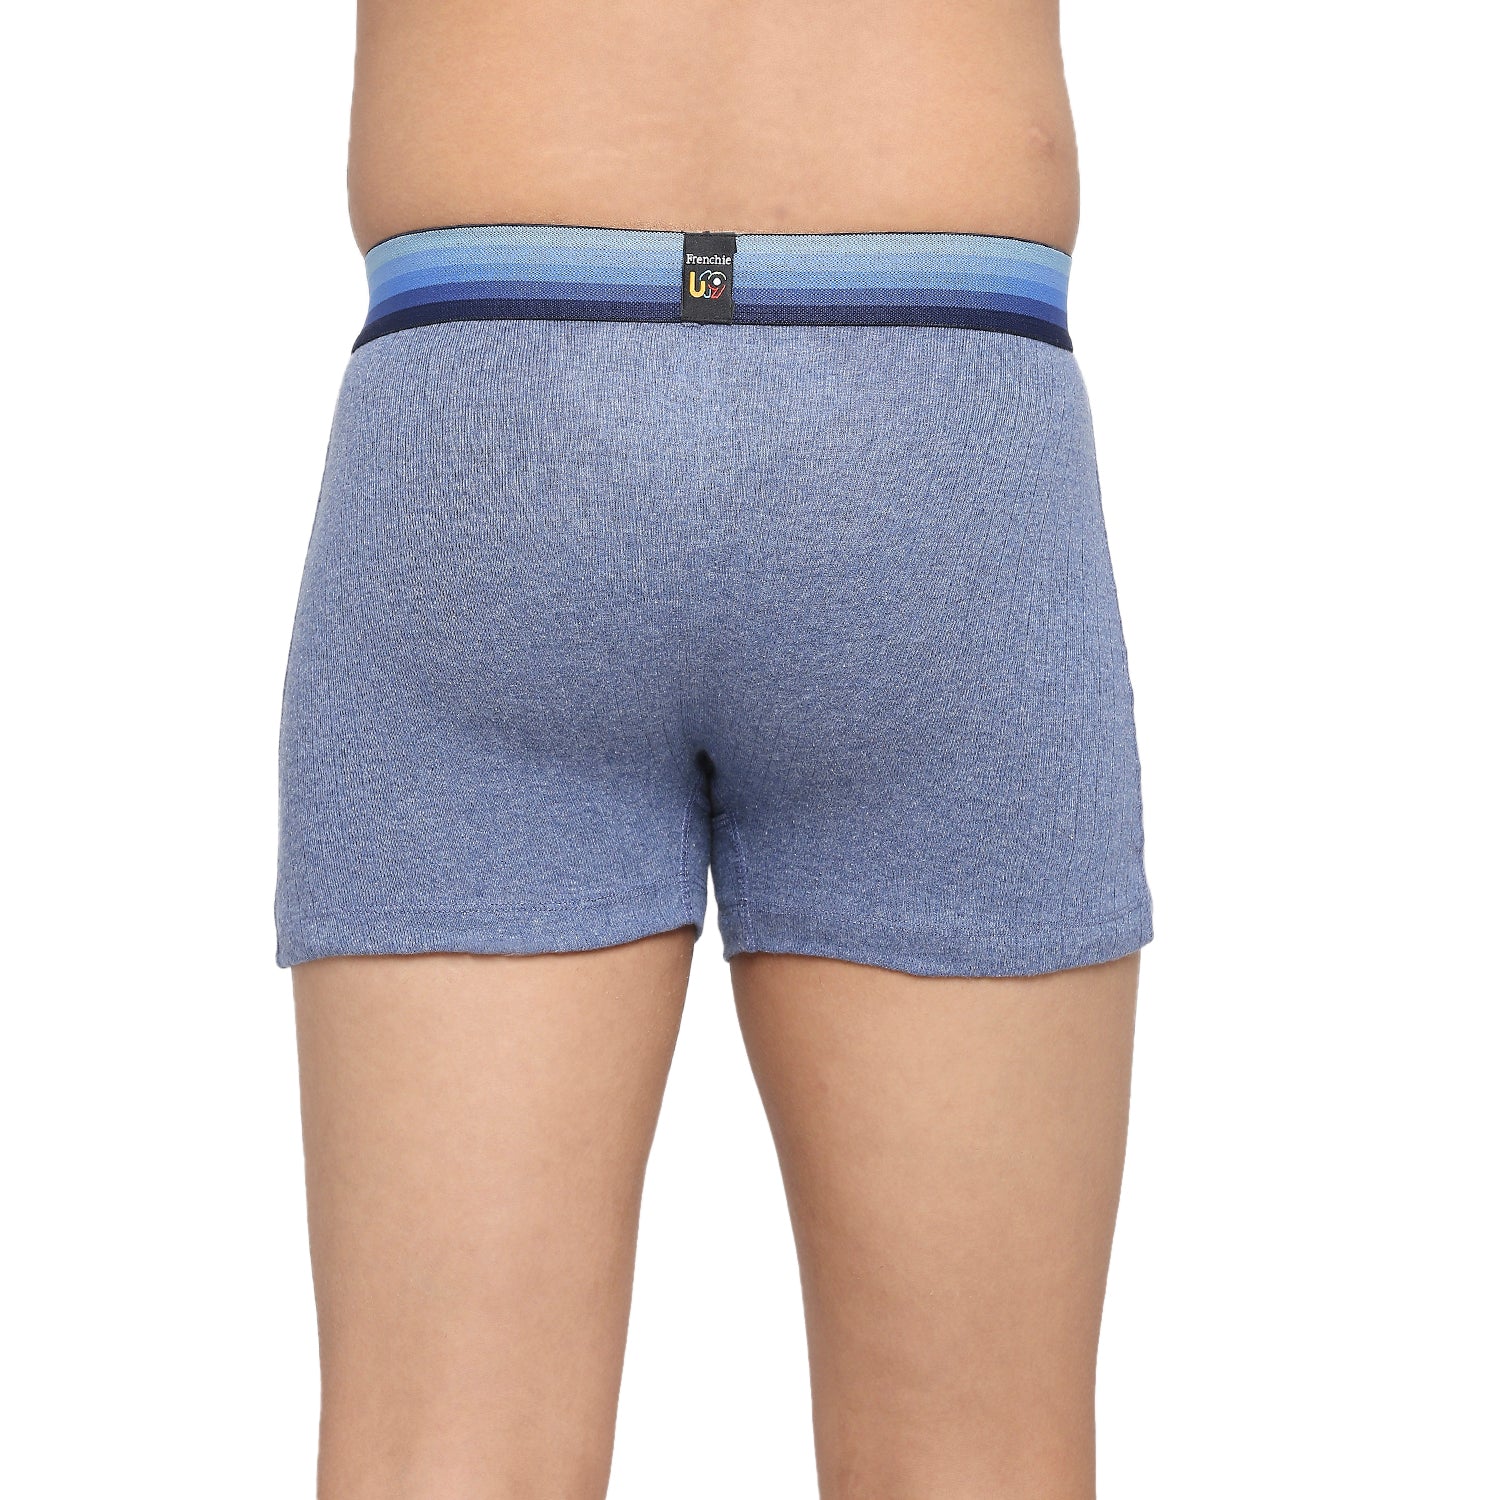 FRENCHIE Teenagers Cotton Trunk Blue and Grey - Pack of 2